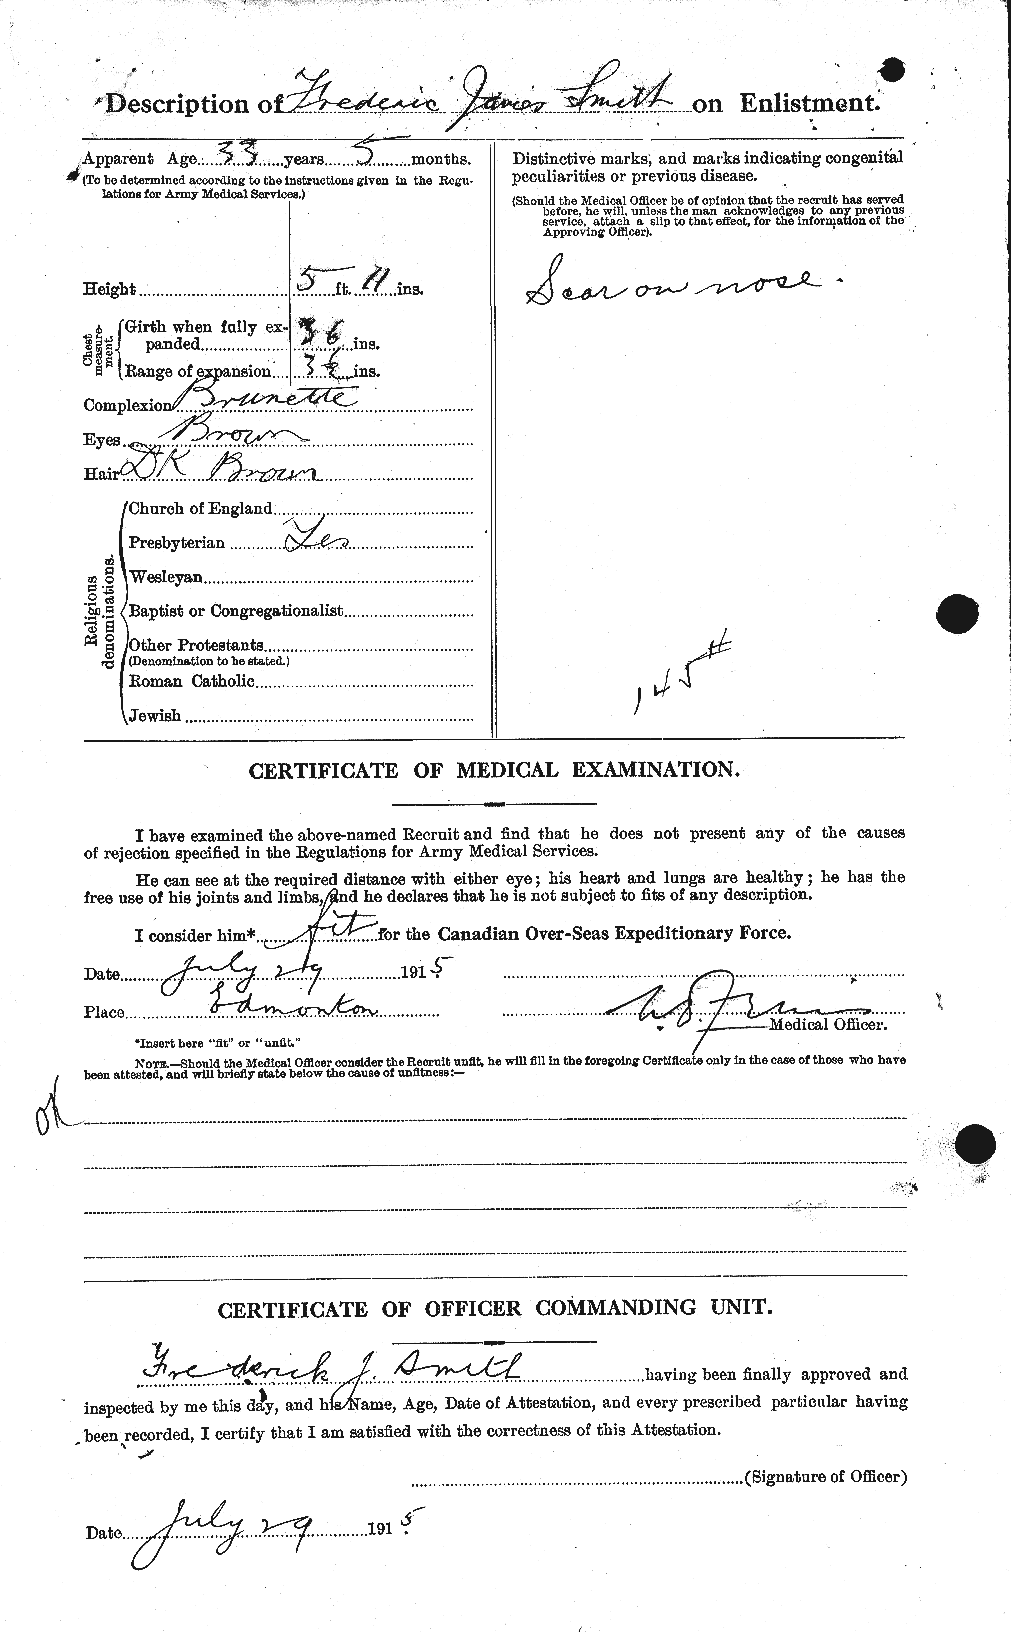 Personnel Records of the First World War - CEF 103687b